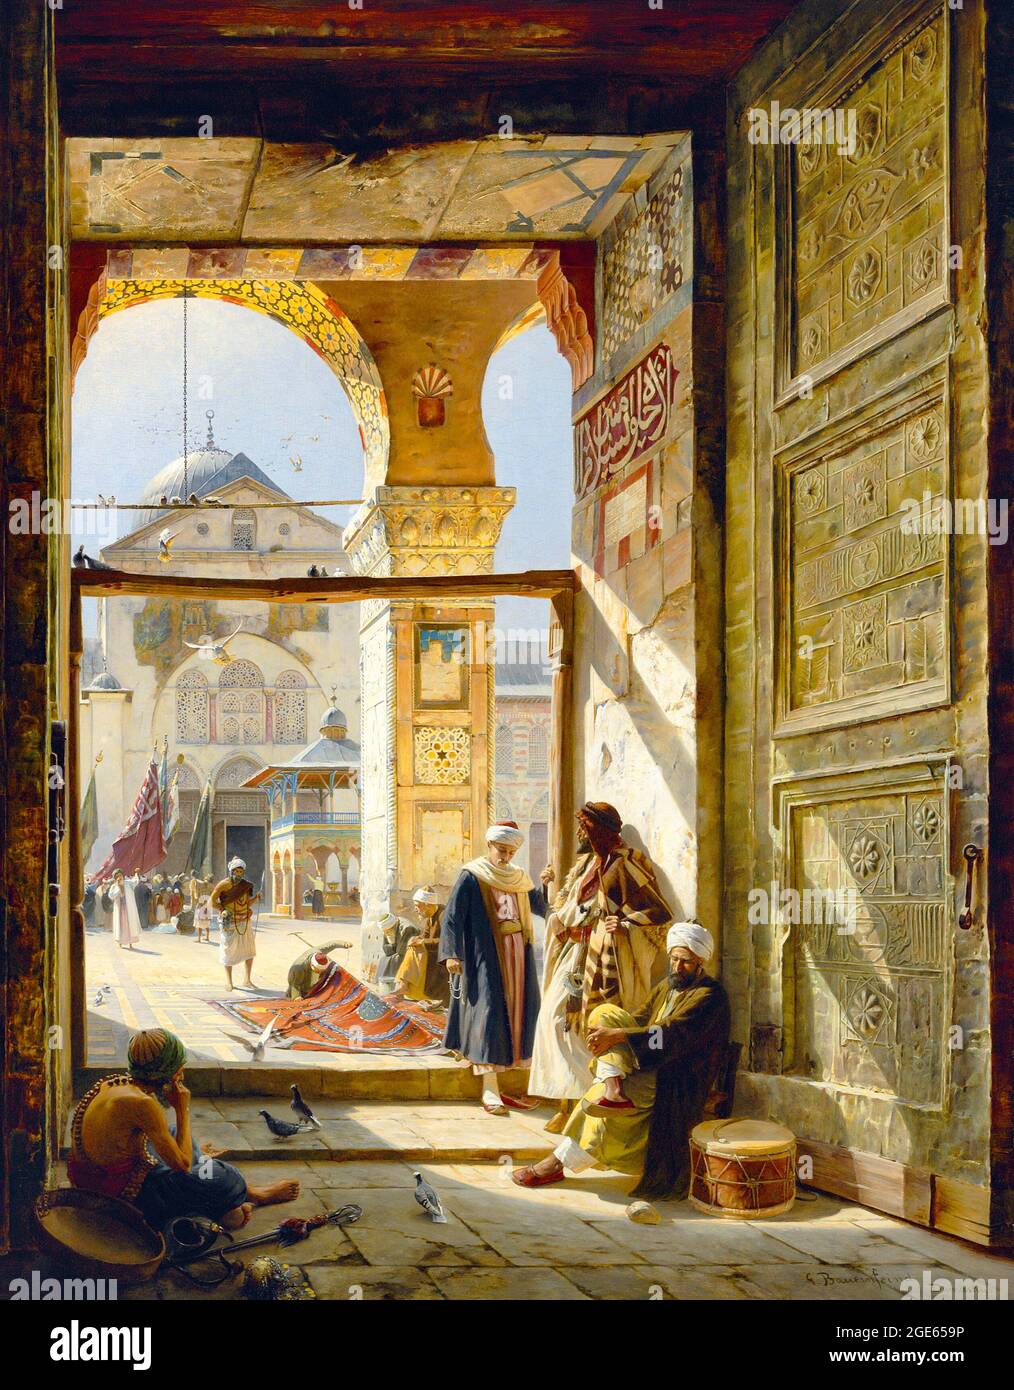 Syria: The Gate of the Great Umayyad Mosque, Damascus. Painting by Gustav Bauernfeind (1848-1904), 1890.  Gustav Bauernfeind (4 September 1848, Sulz am Neckar - 24 December 1904, Jerusalem) was a German painter, illustrator and architect of partly Jewish origin. He is considered to be one of the most notable Orientalist painters of Germany. Stock Photo